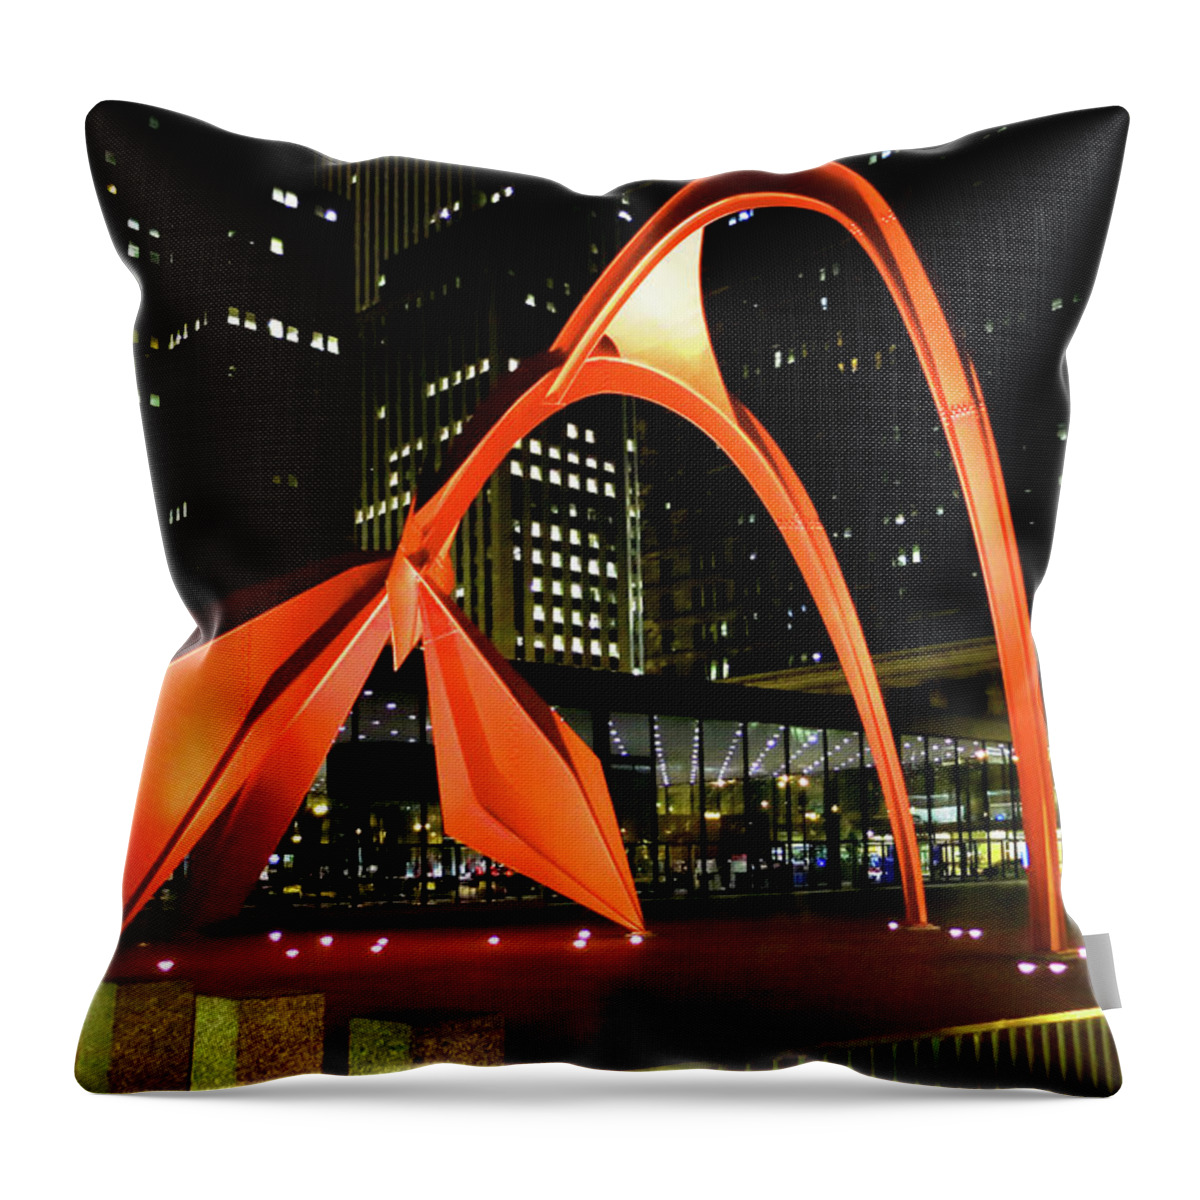 Architecture Throw Pillow featuring the photograph Calder Flamingo Sculpture Chicago Night by Patrick Malon